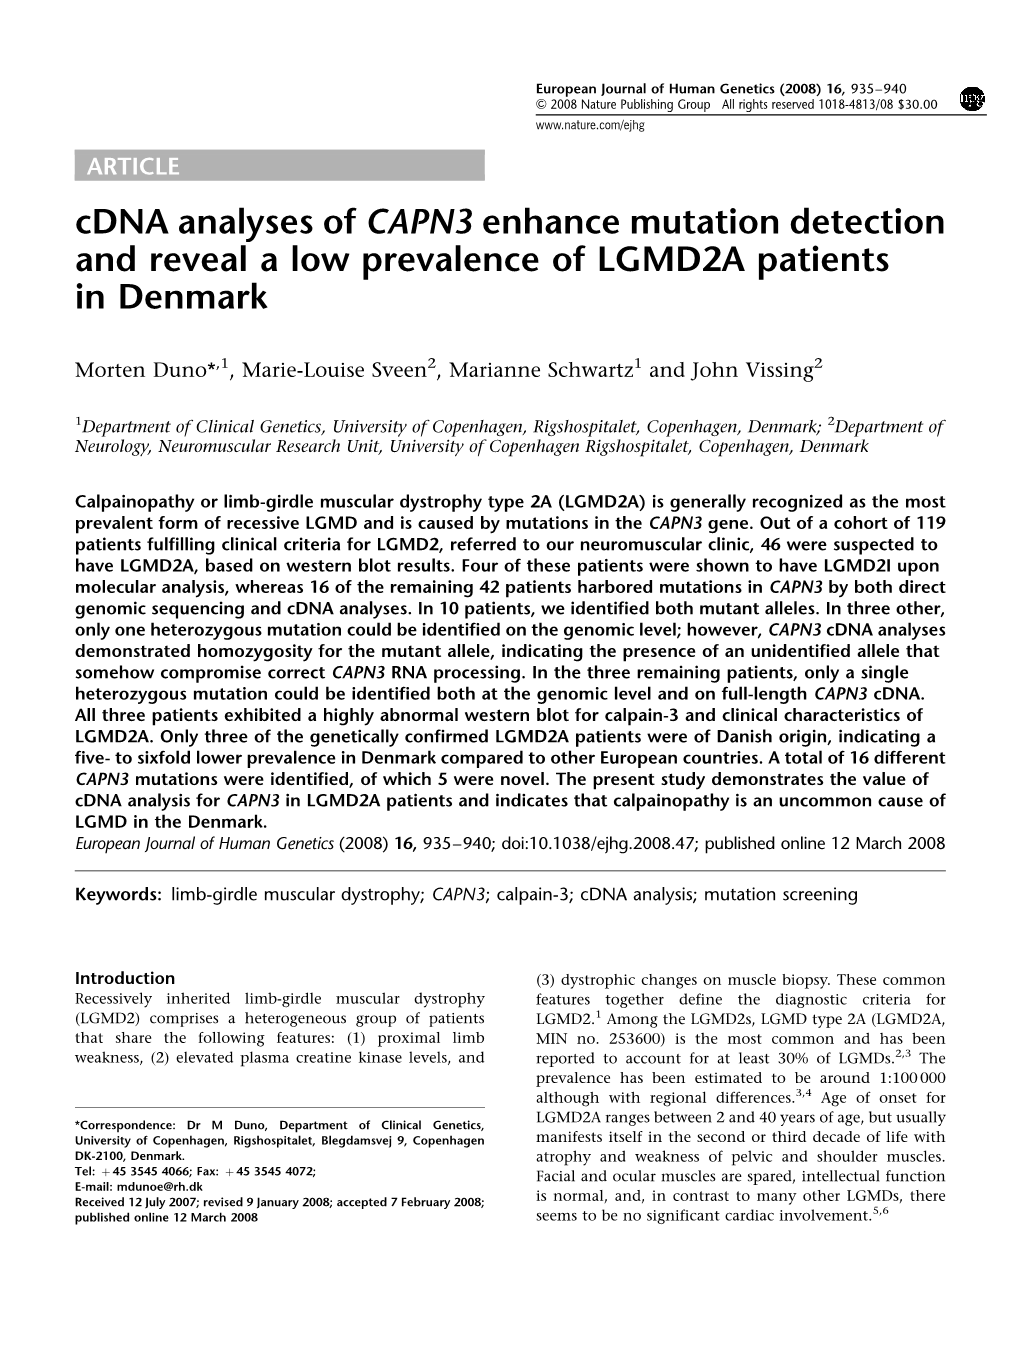 Cdna Analyses of CAPN3 Enhance Mutation Detection and Reveal a Low Prevalence of LGMD2A Patients in Denmark